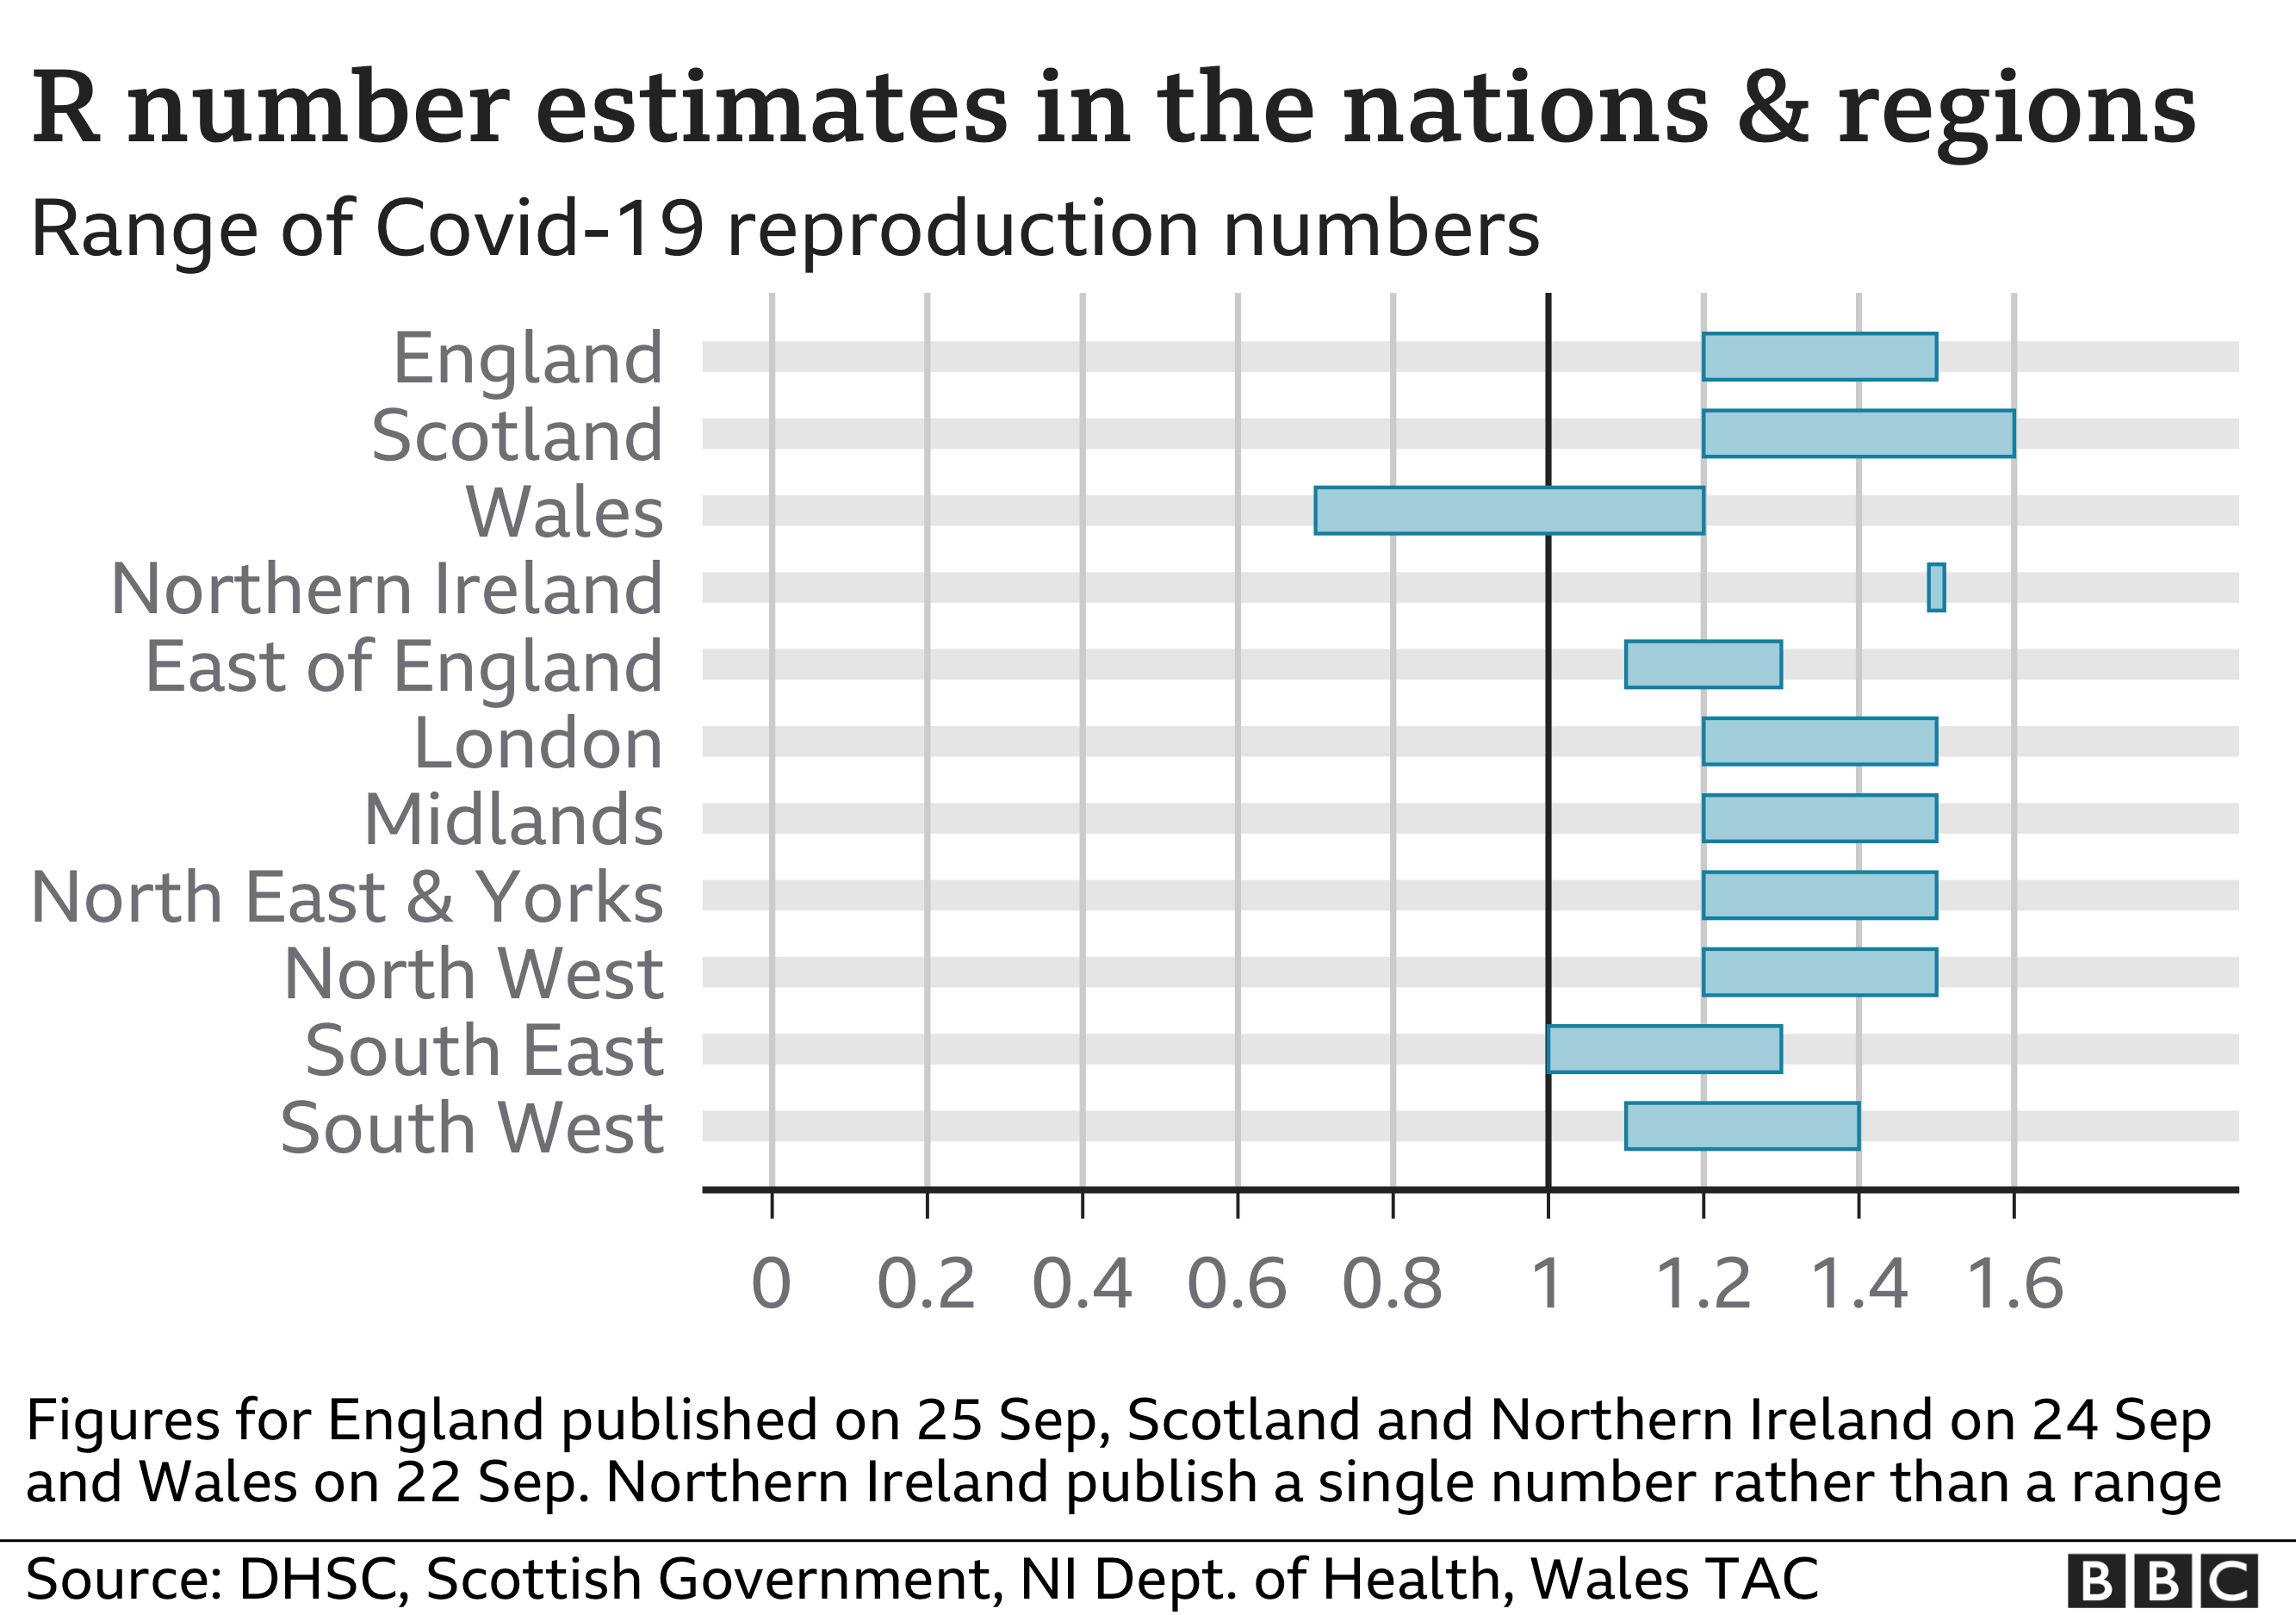 R number estimates in UK nations and regions 22-9-2020 - enlarge